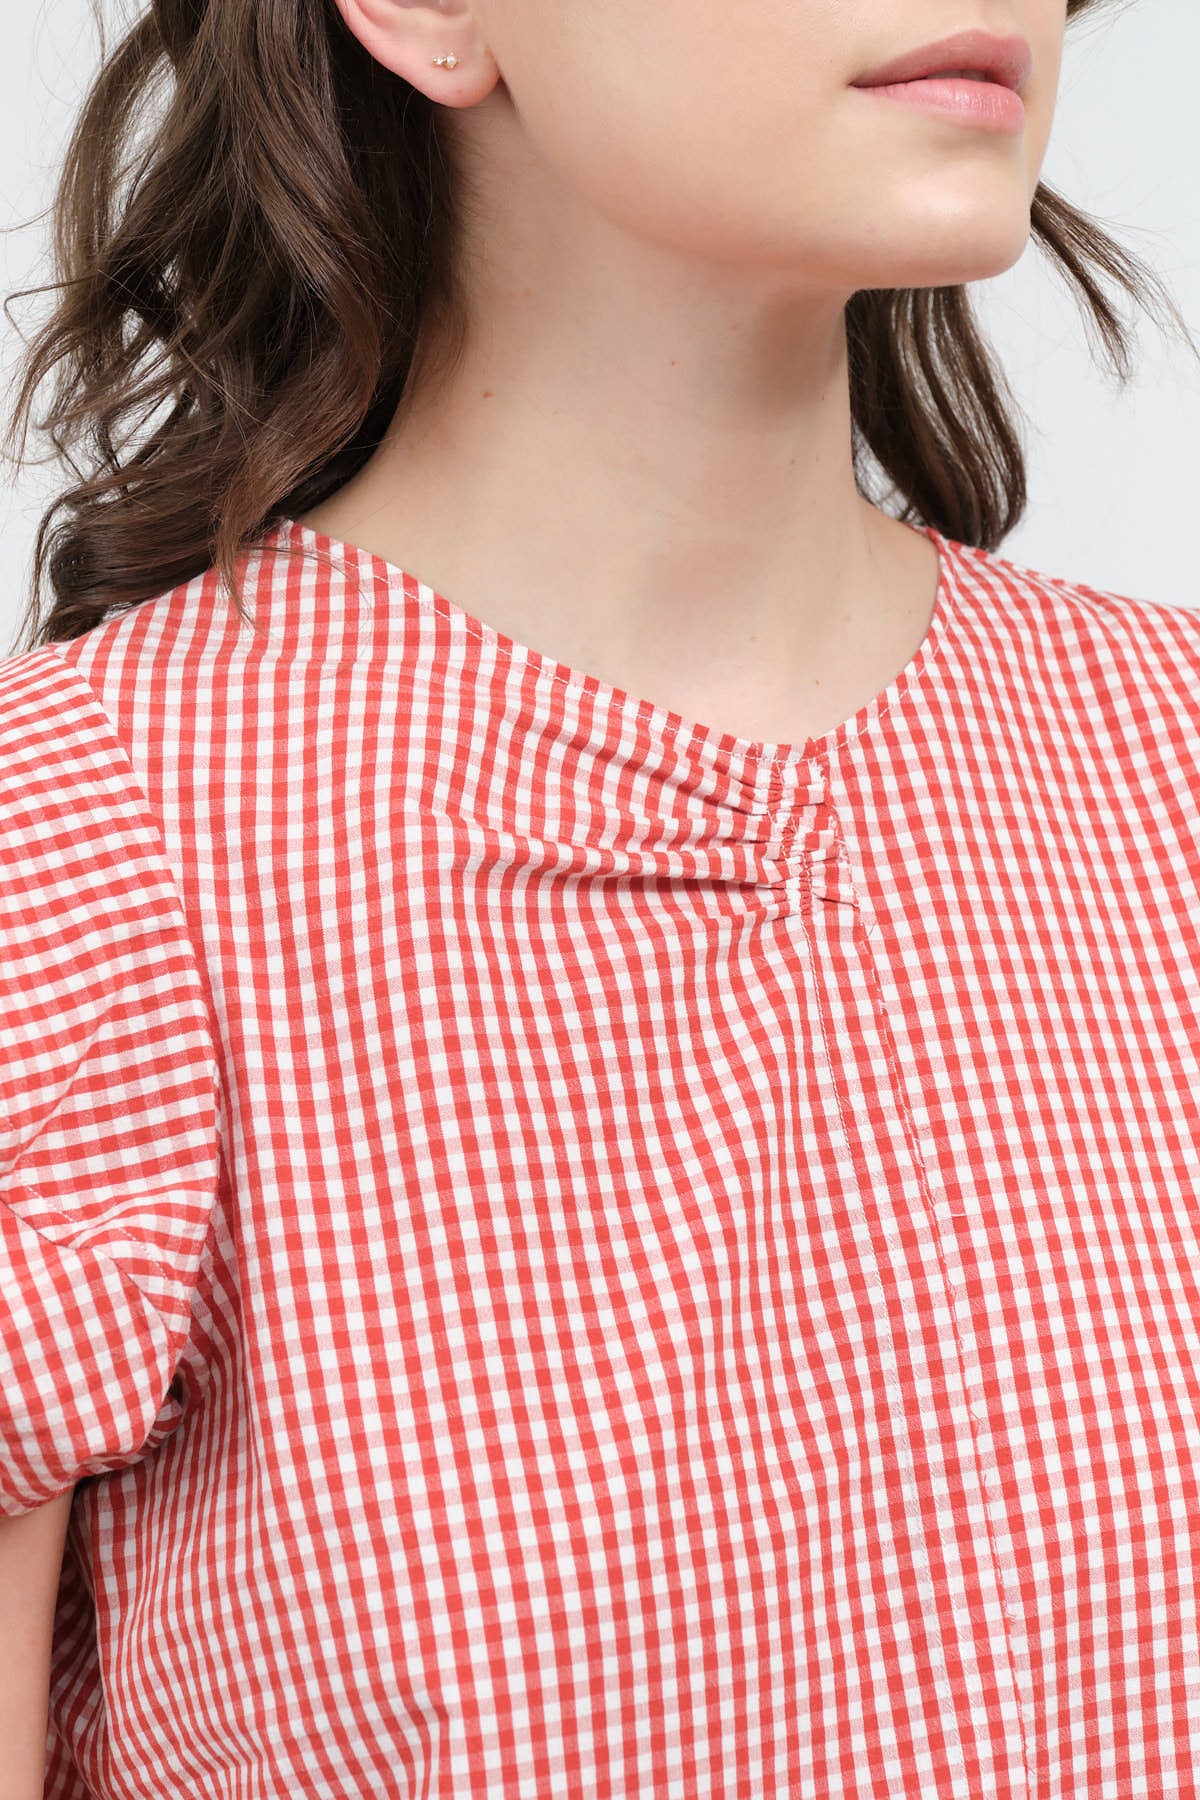 Collar view of Calita Blouse in Red Gingham